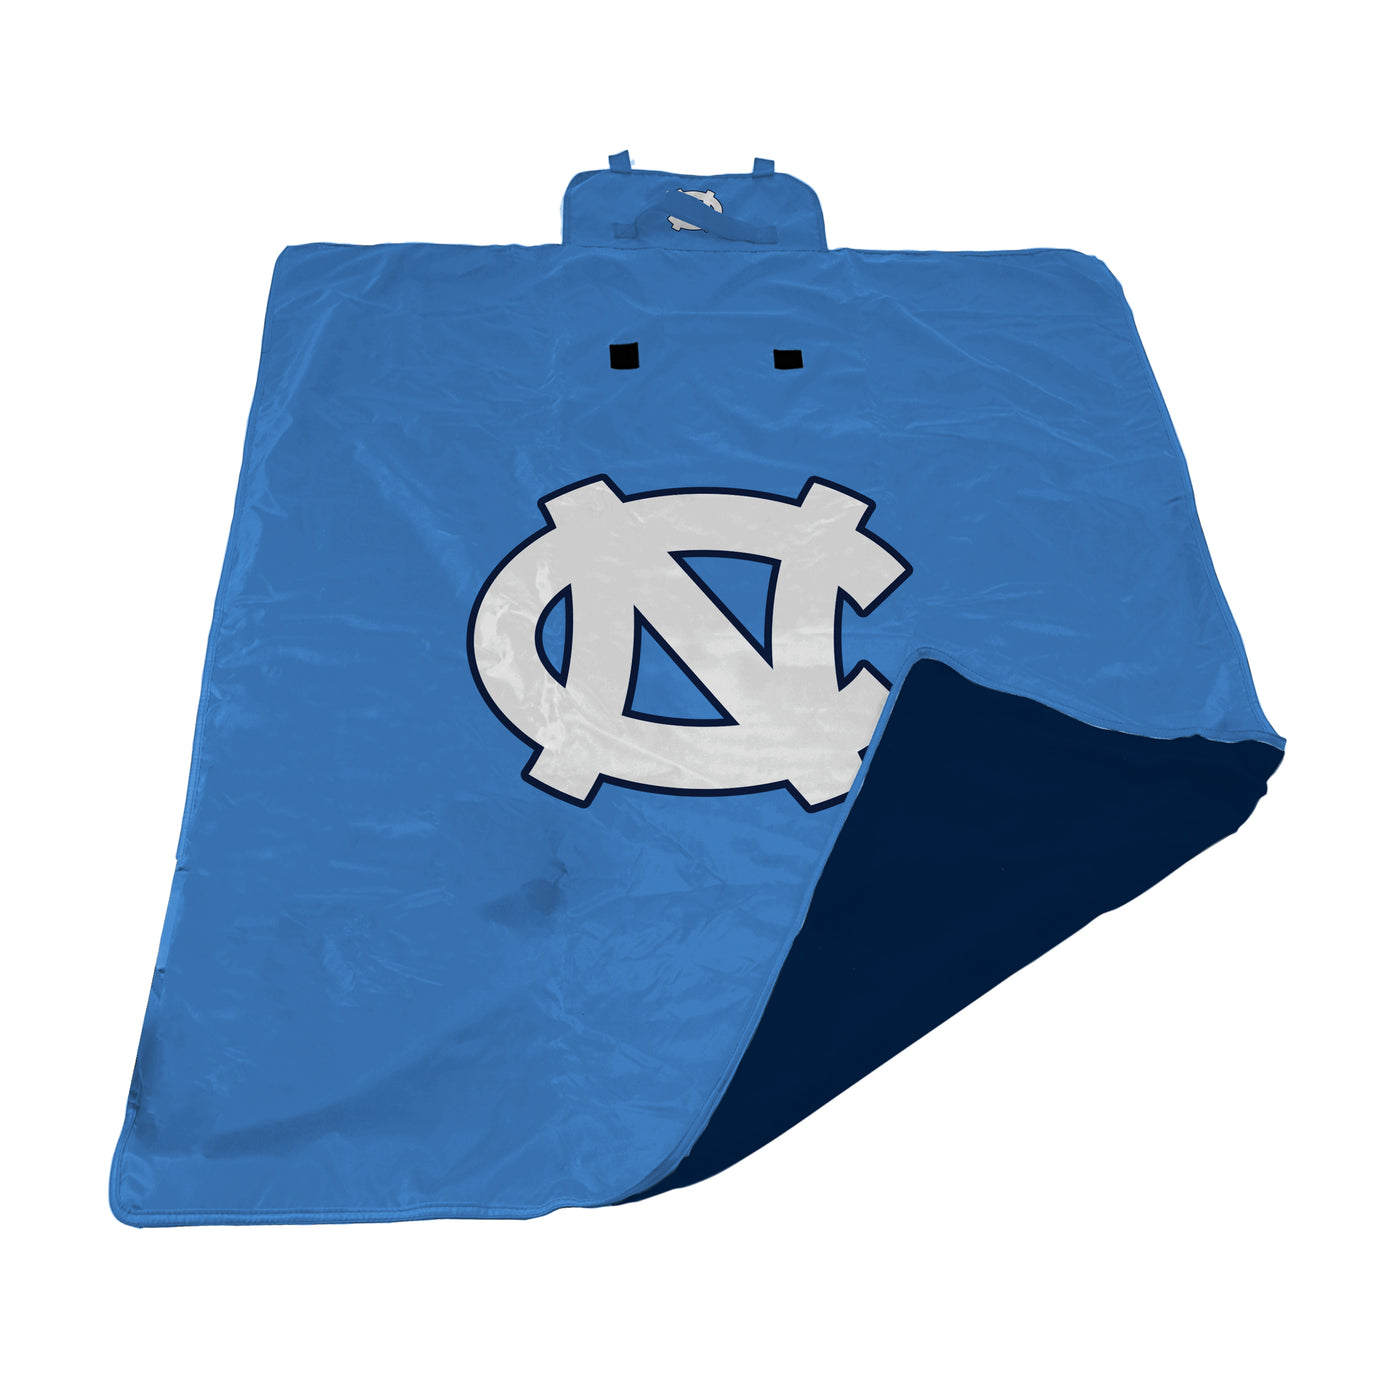 North Carolina All Weather Outdoor Blanket XL